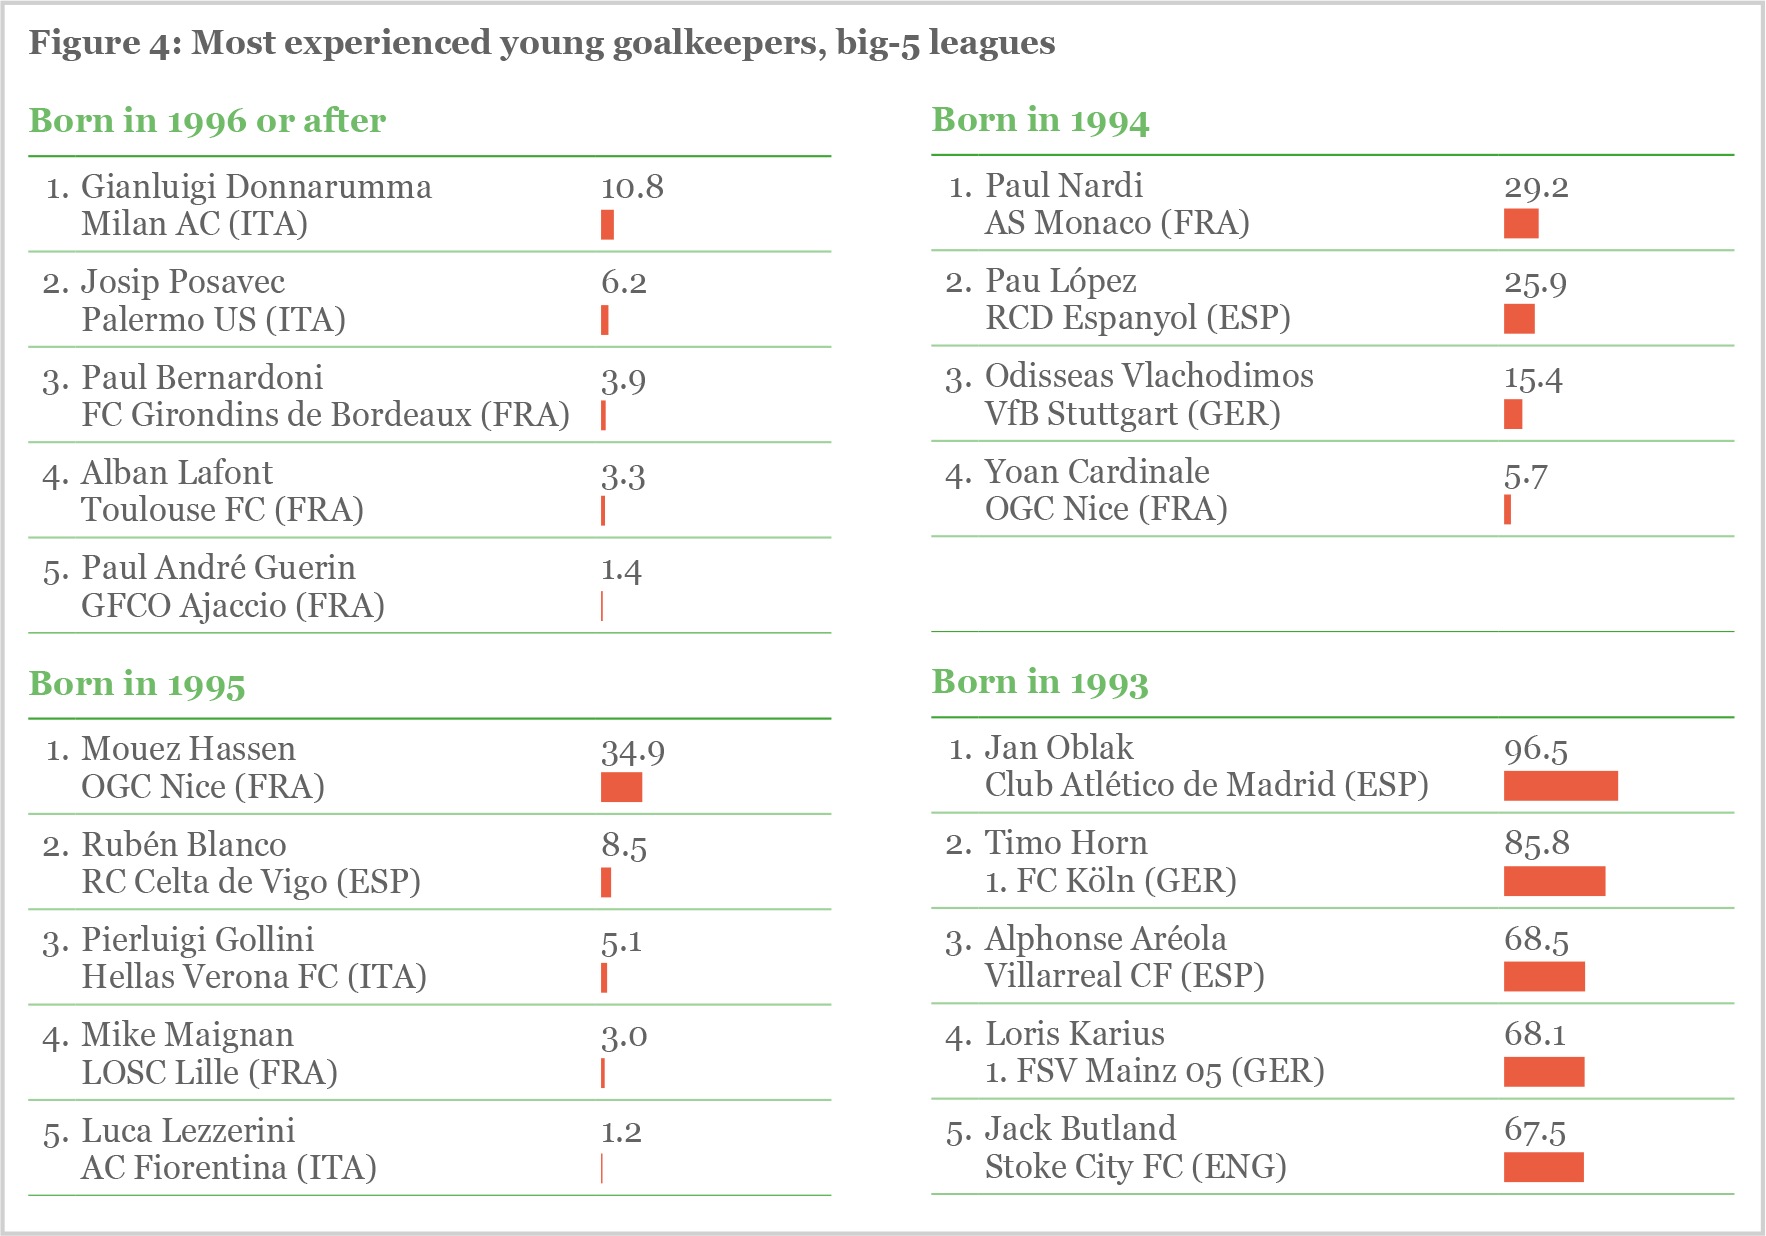 Figure 4: Most experienced young goalkeepers, big-5 leagues